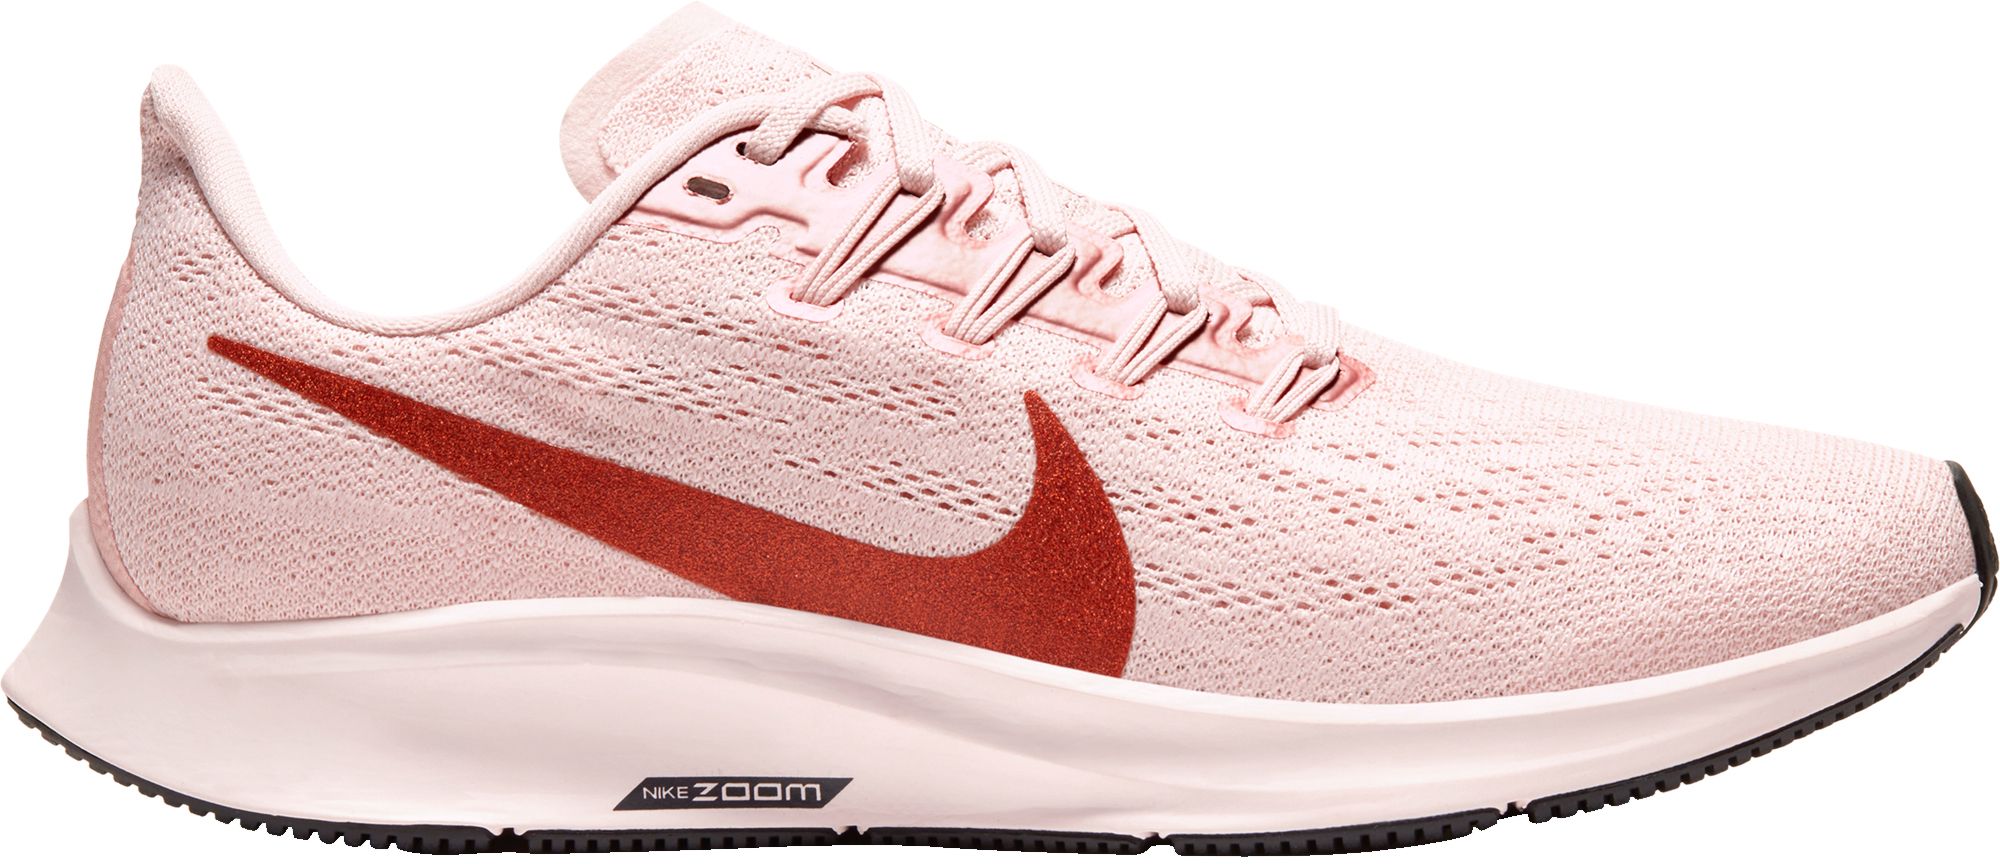 women's nike air zoom pegasus 36 holiday sparkle running shoes